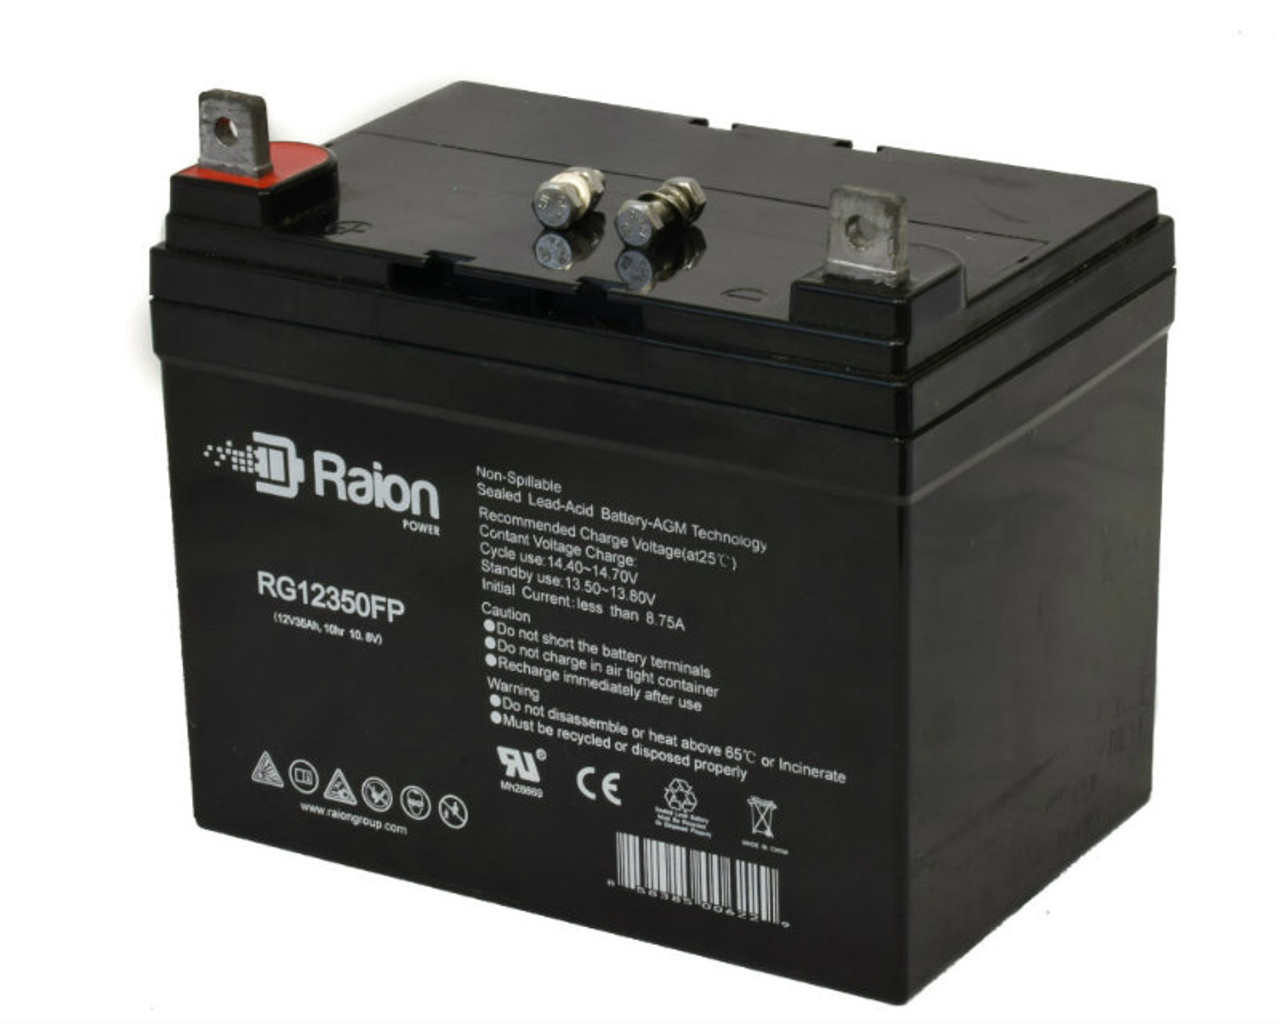 Raion Power Replacement 12V 35Ah RG12350FP Battery for Clipper 2304M